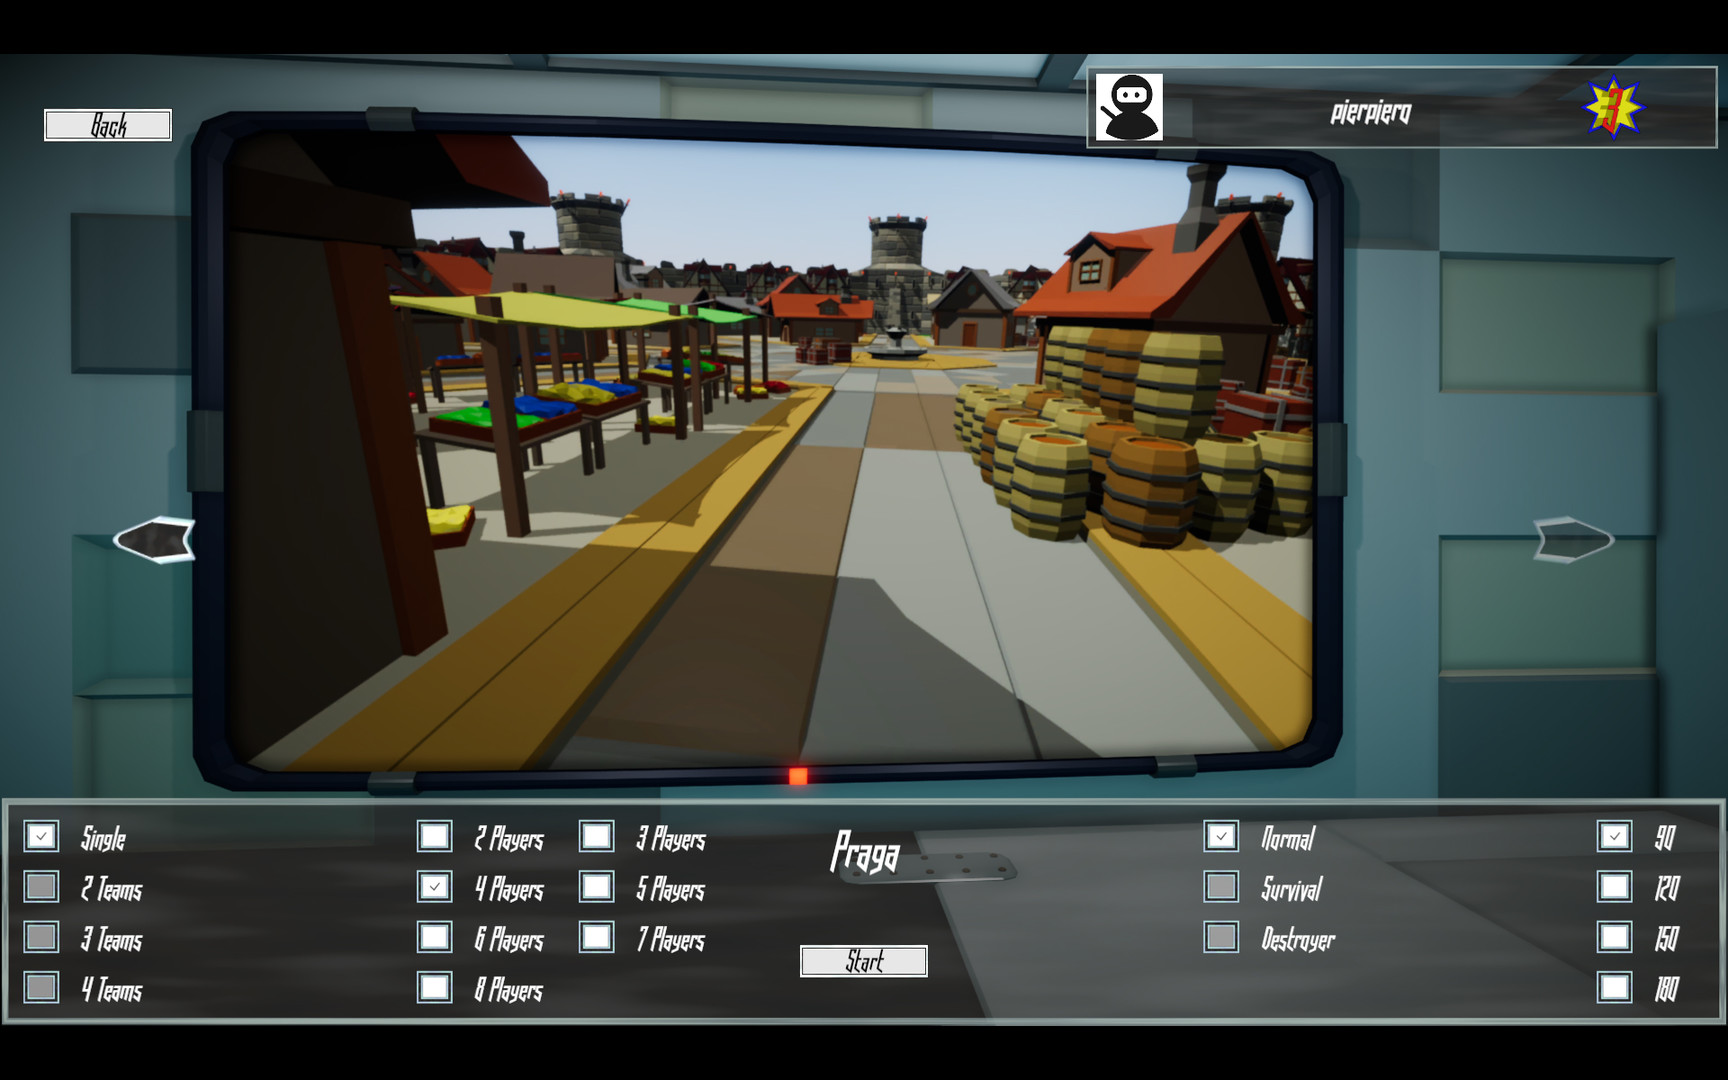 Cannon Arena Free Download